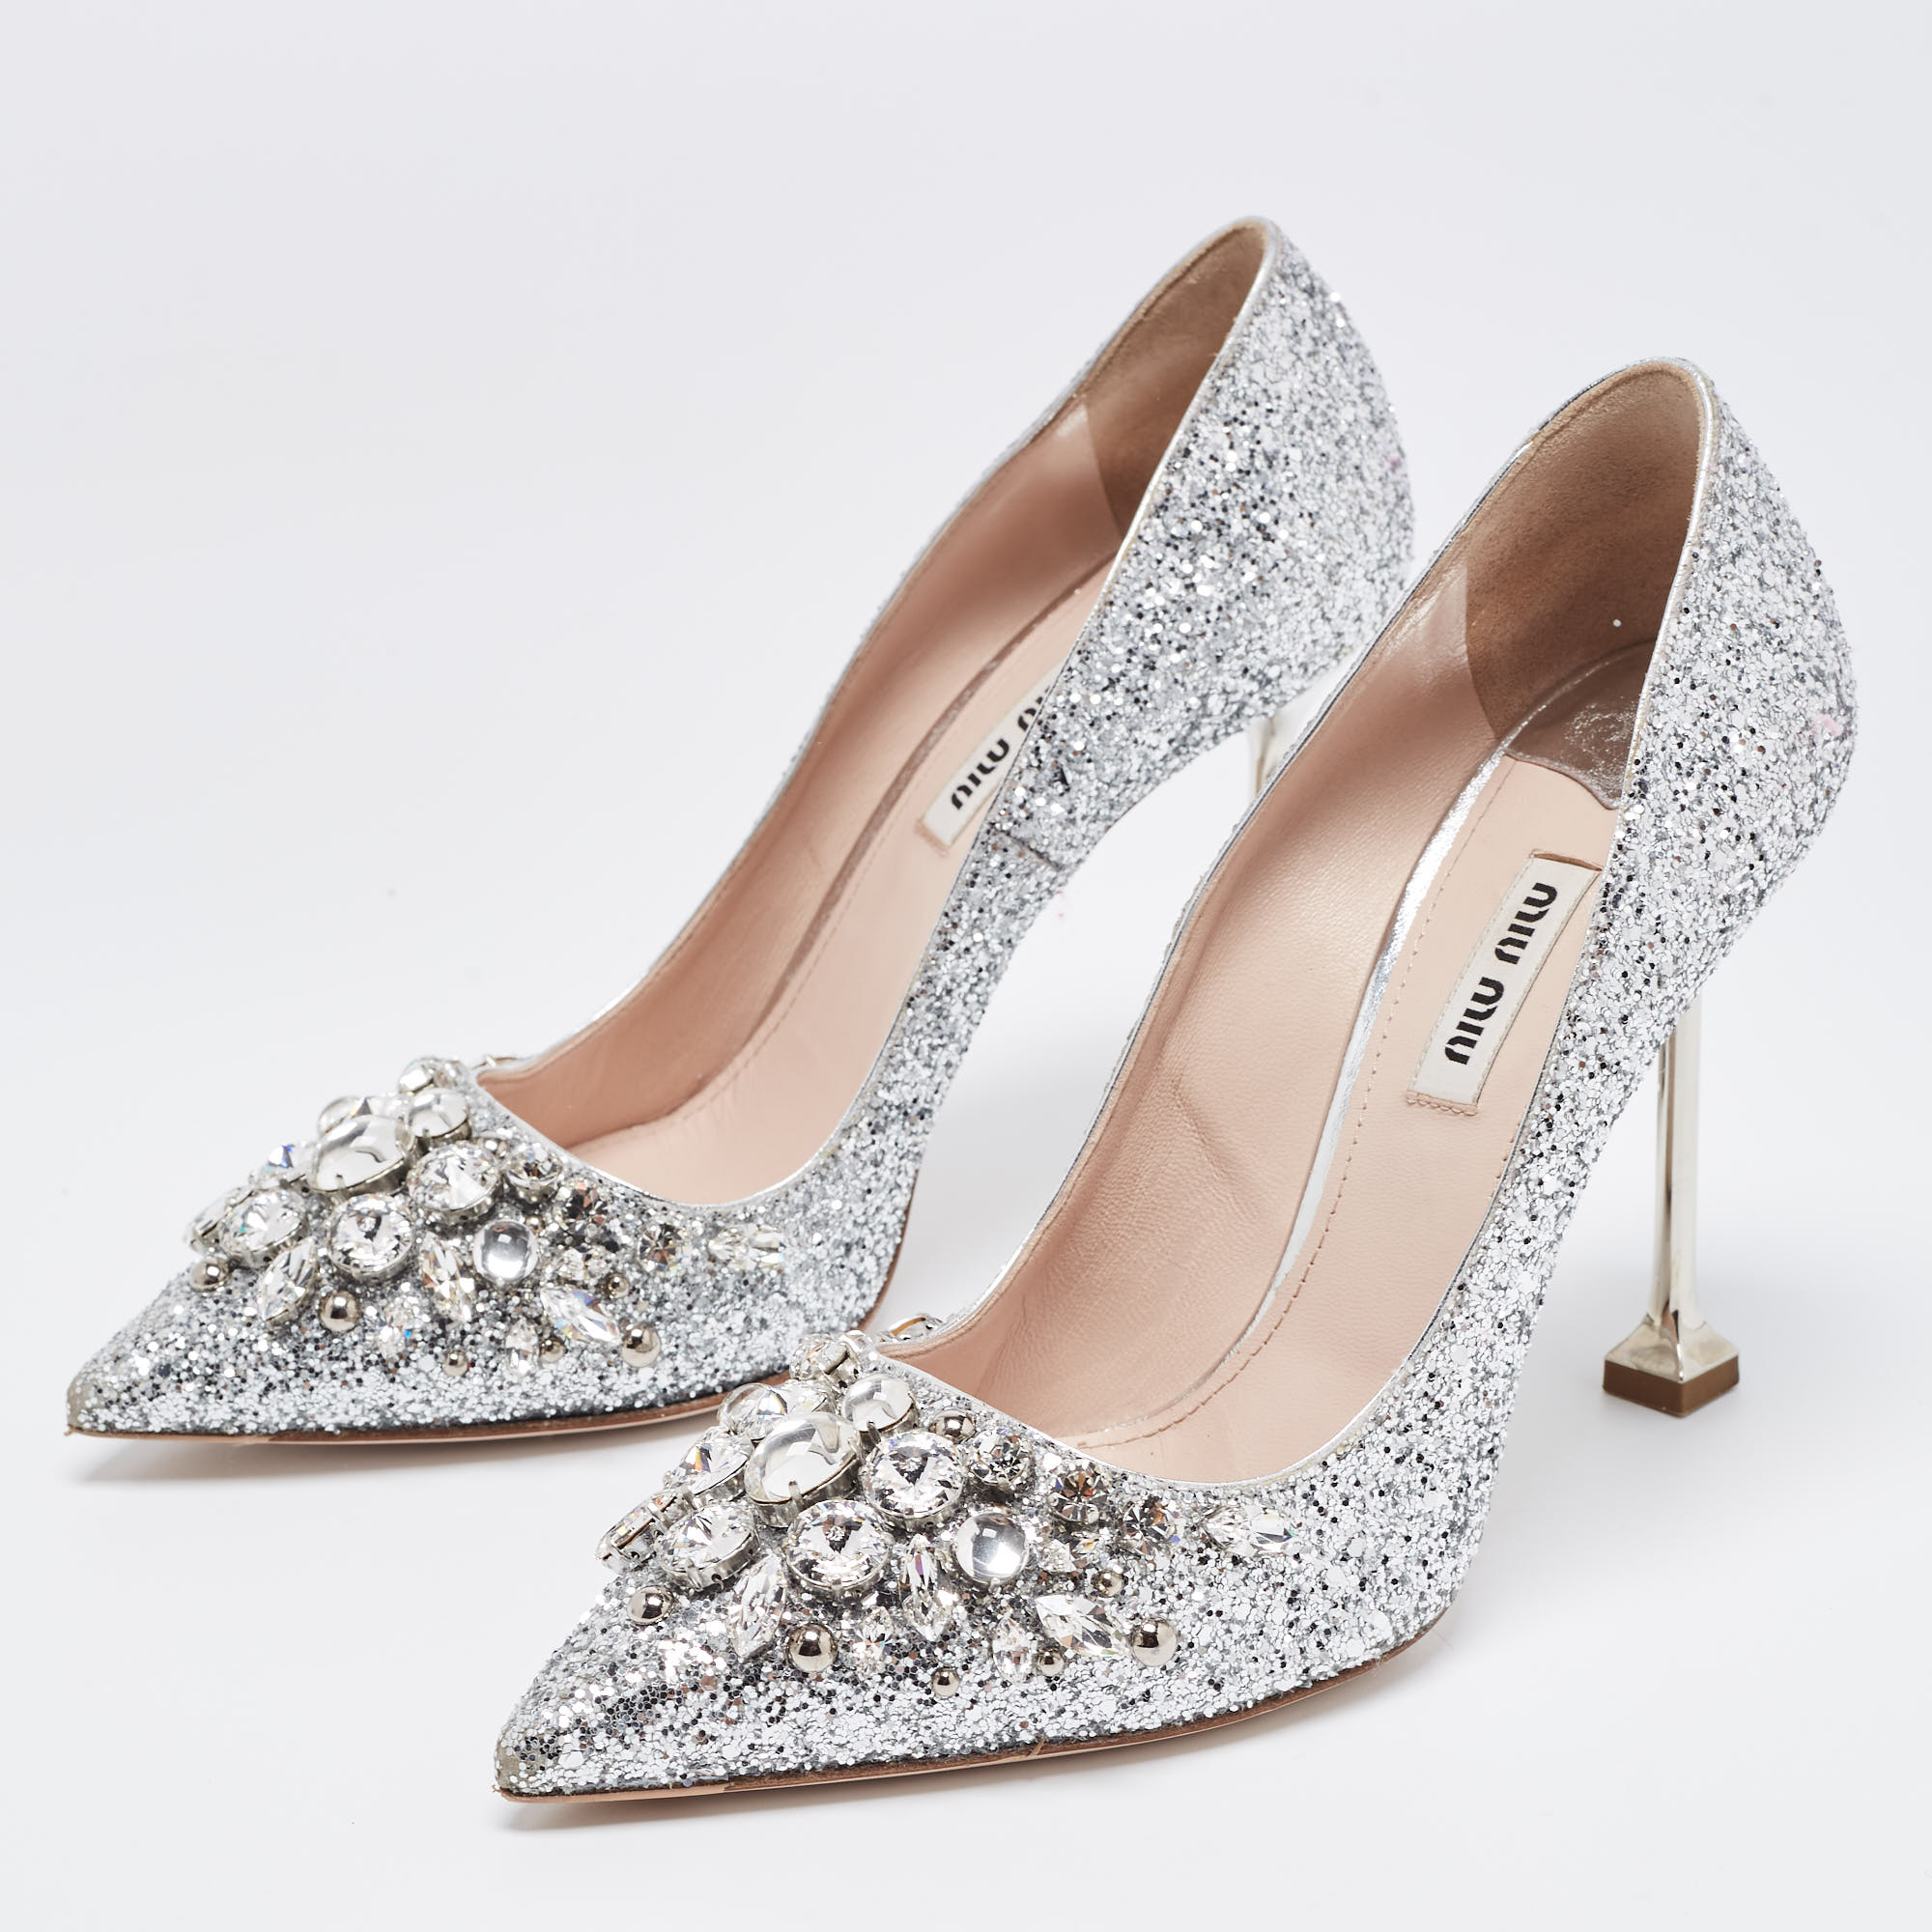 

Miu Miu Silver Studded Glitter Crystal Embellished Pointed-Toe Pumps Size